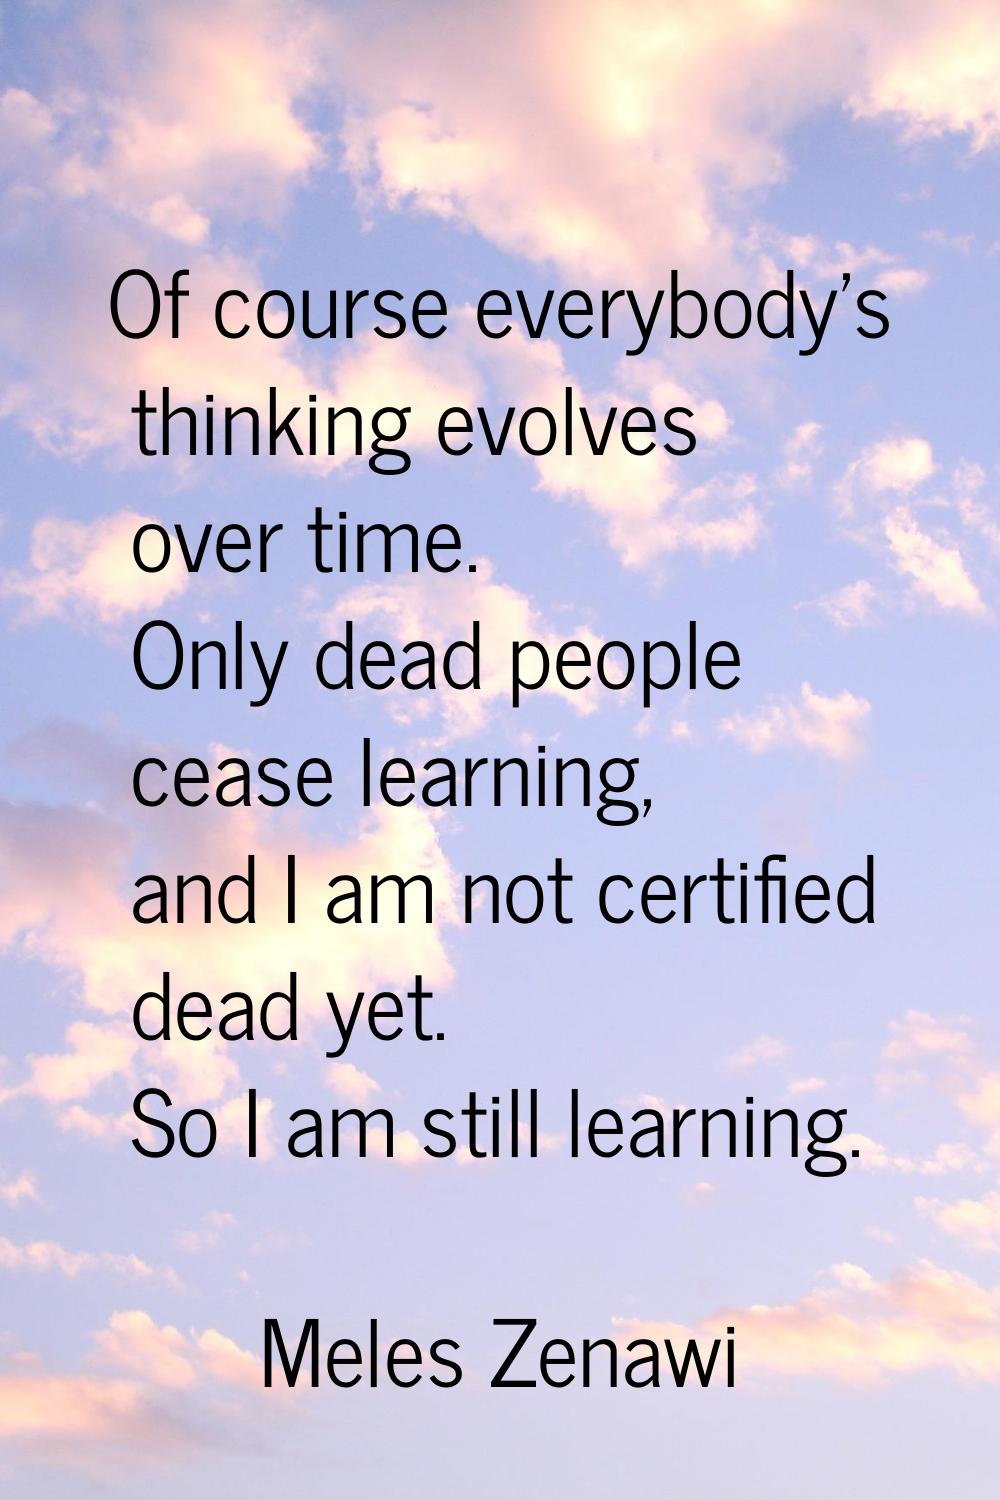 Of course everybody's thinking evolves over time. Only dead people cease learning, and I am not cer